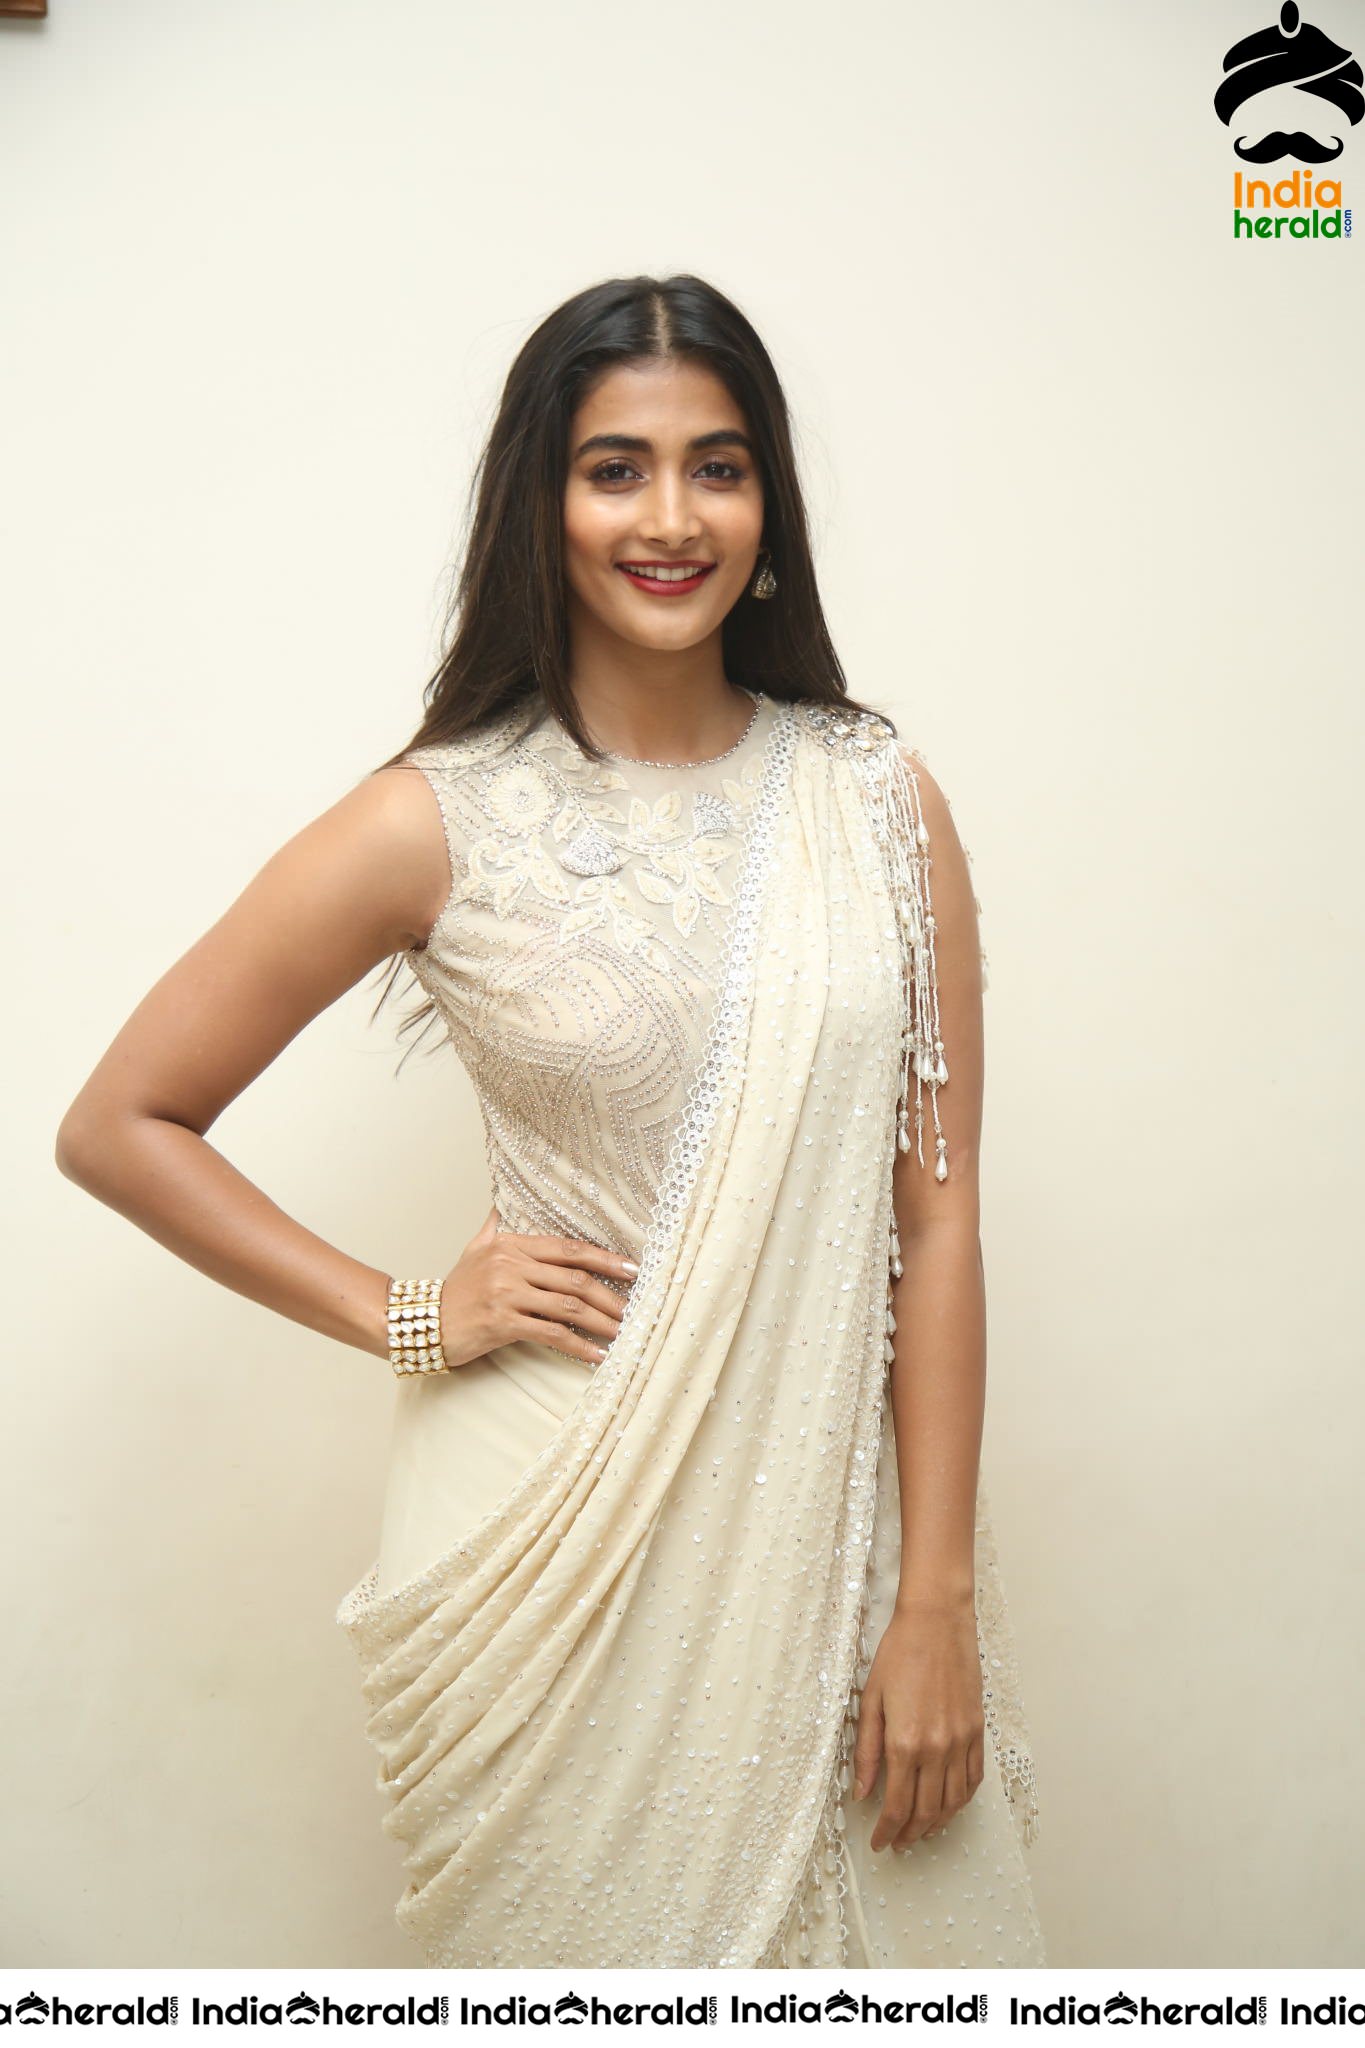 Pooja Hegde Looking Tempting and Cute in This Costume Set 1